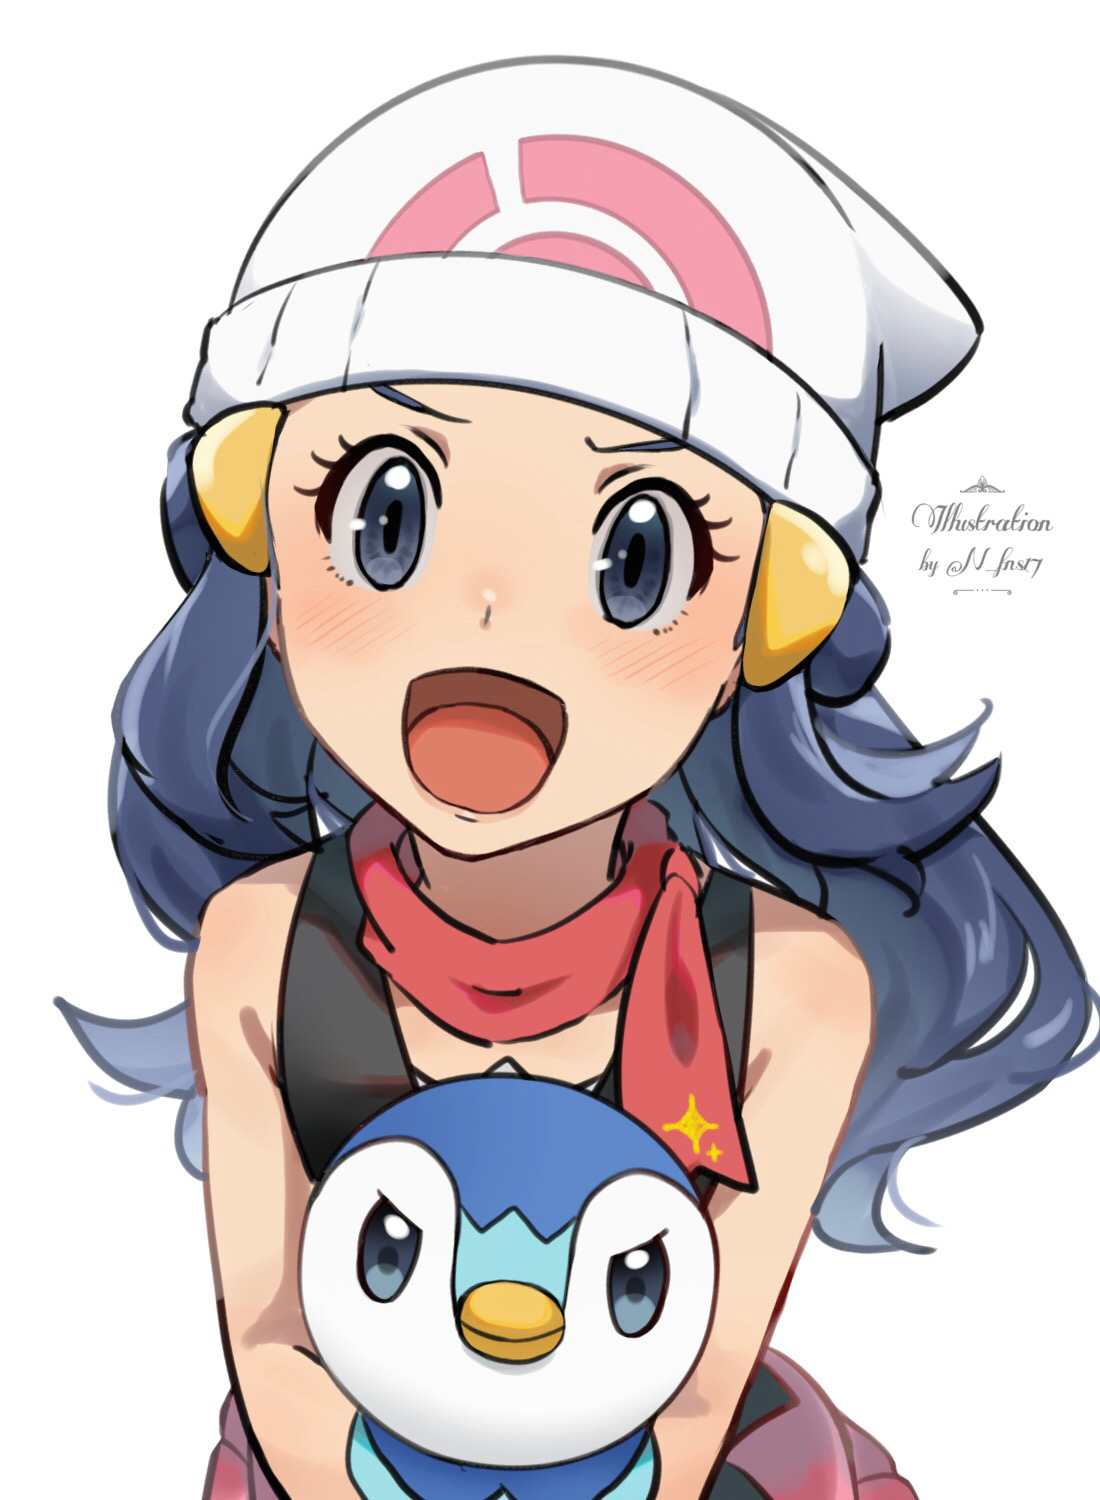 dawn and piplup (pokemon and 2 more) drawn by echizen_(n_fns17)